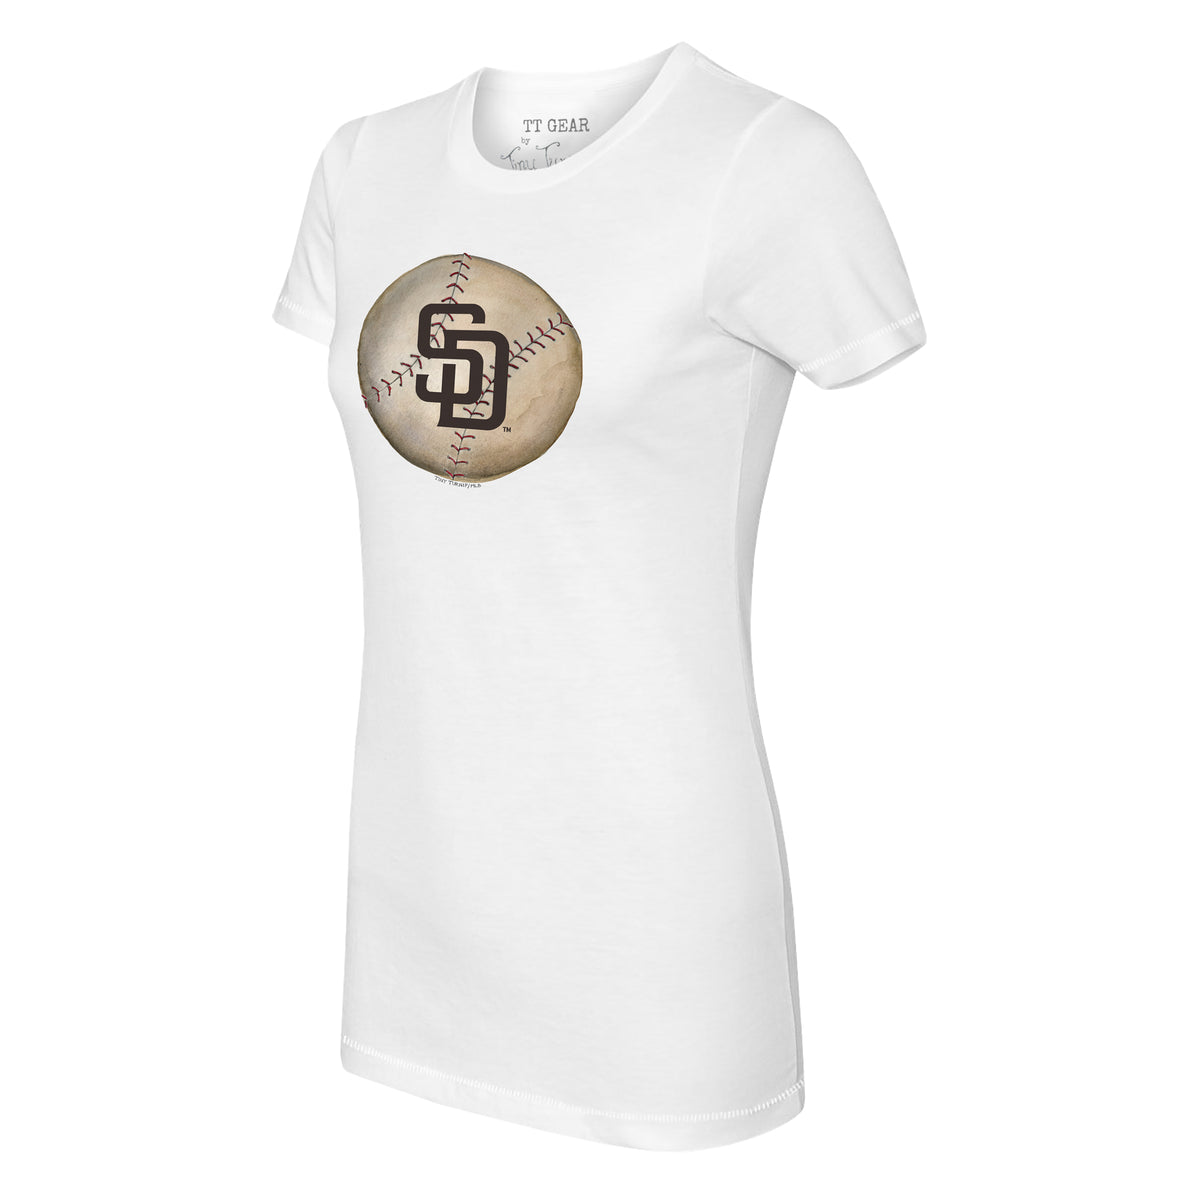 San Diego Padres Women's Jersey for Sale in San Diego, CA